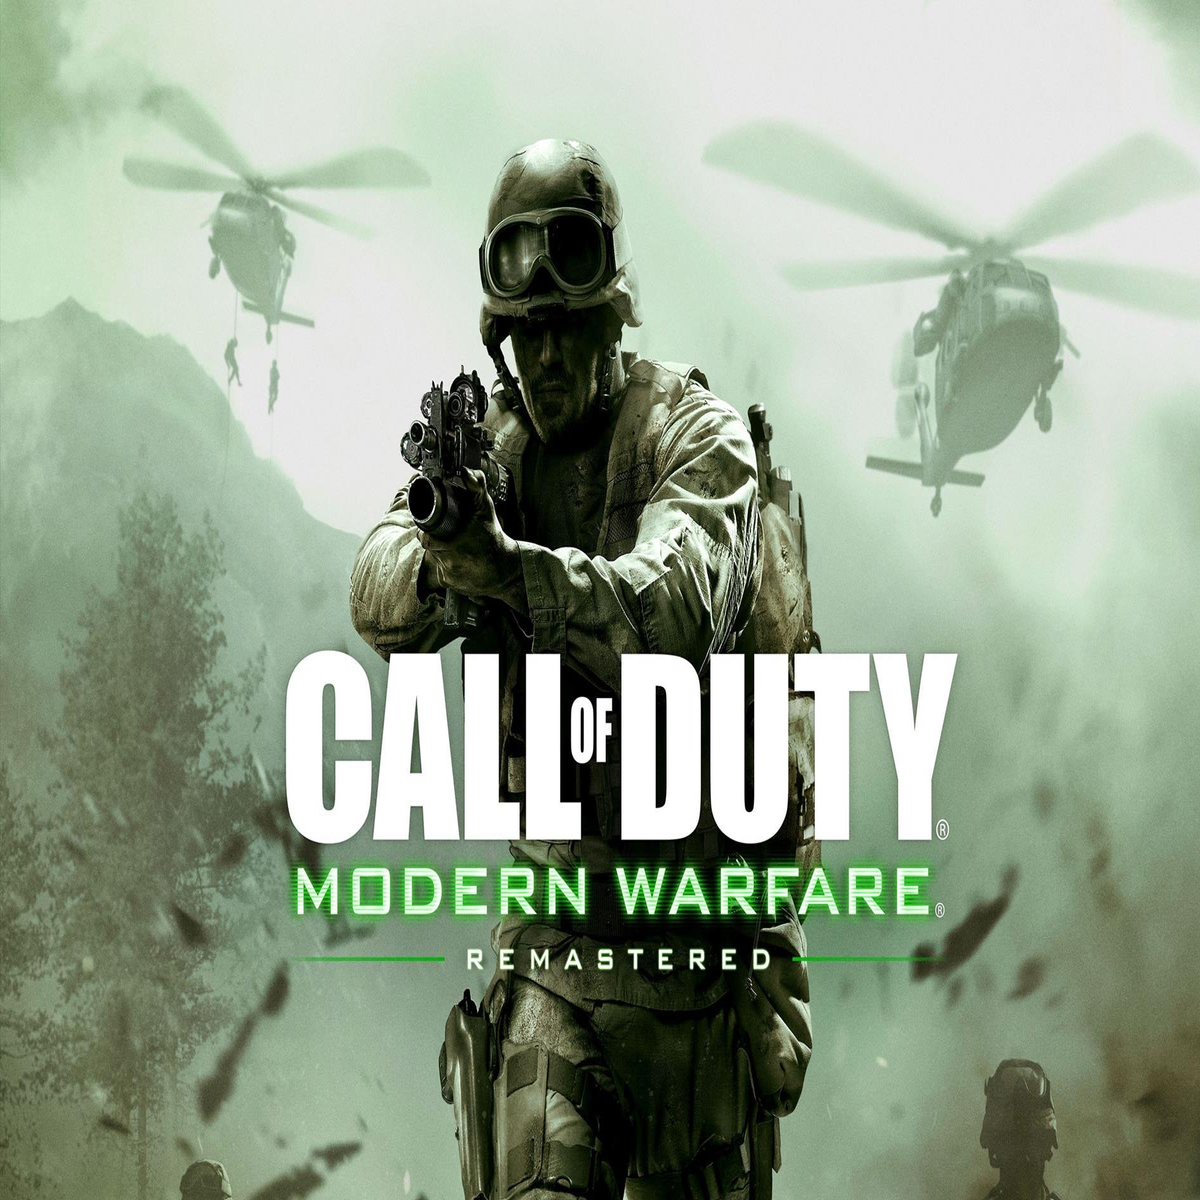 Call of Duty: Modern suggests Remastered | Gamefly next Warfare VG247 standalone month listing release